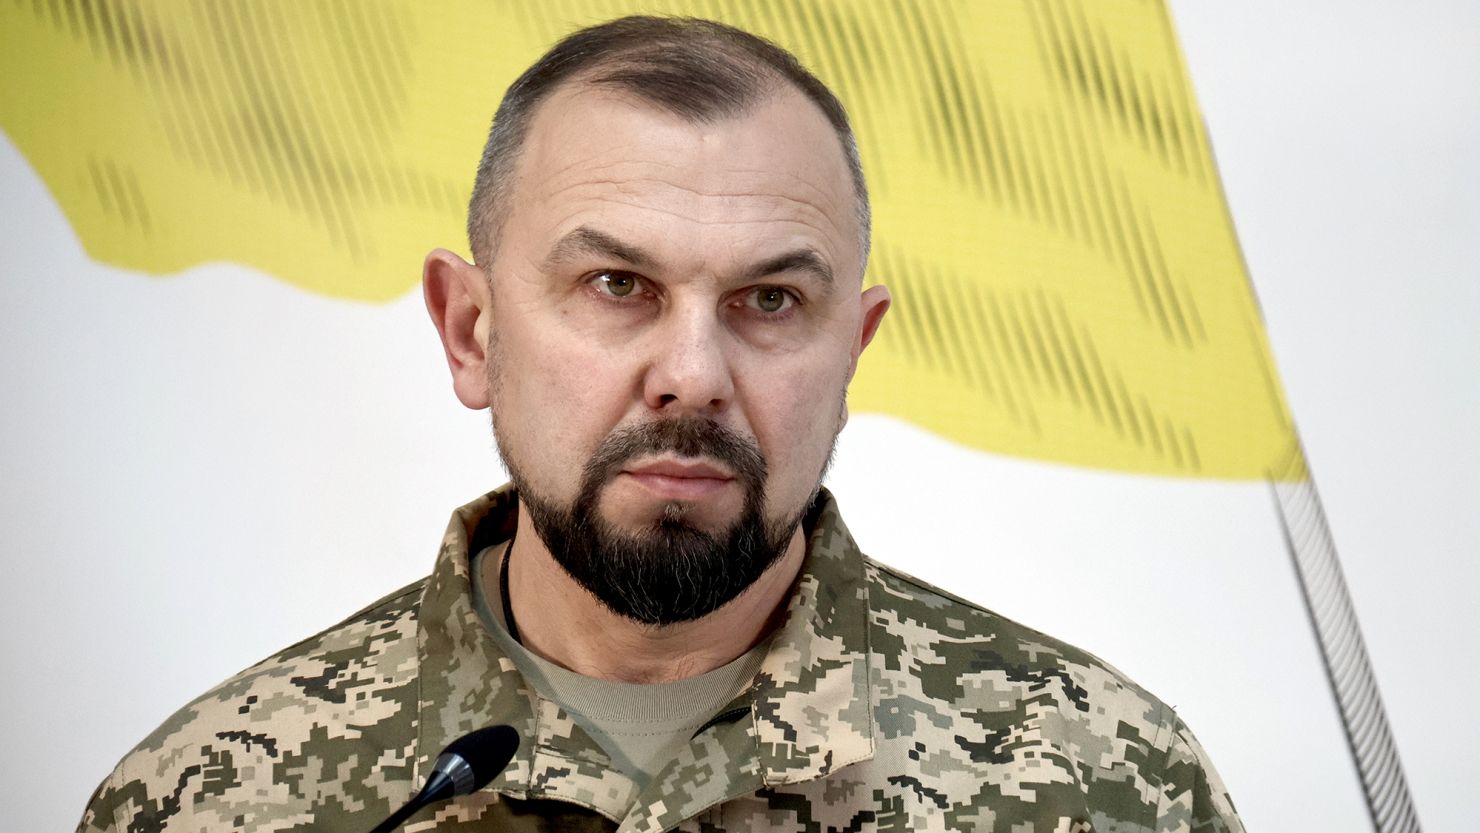 Head of the State Guard Service, Serhii Rud, was dismissed on Thursday.